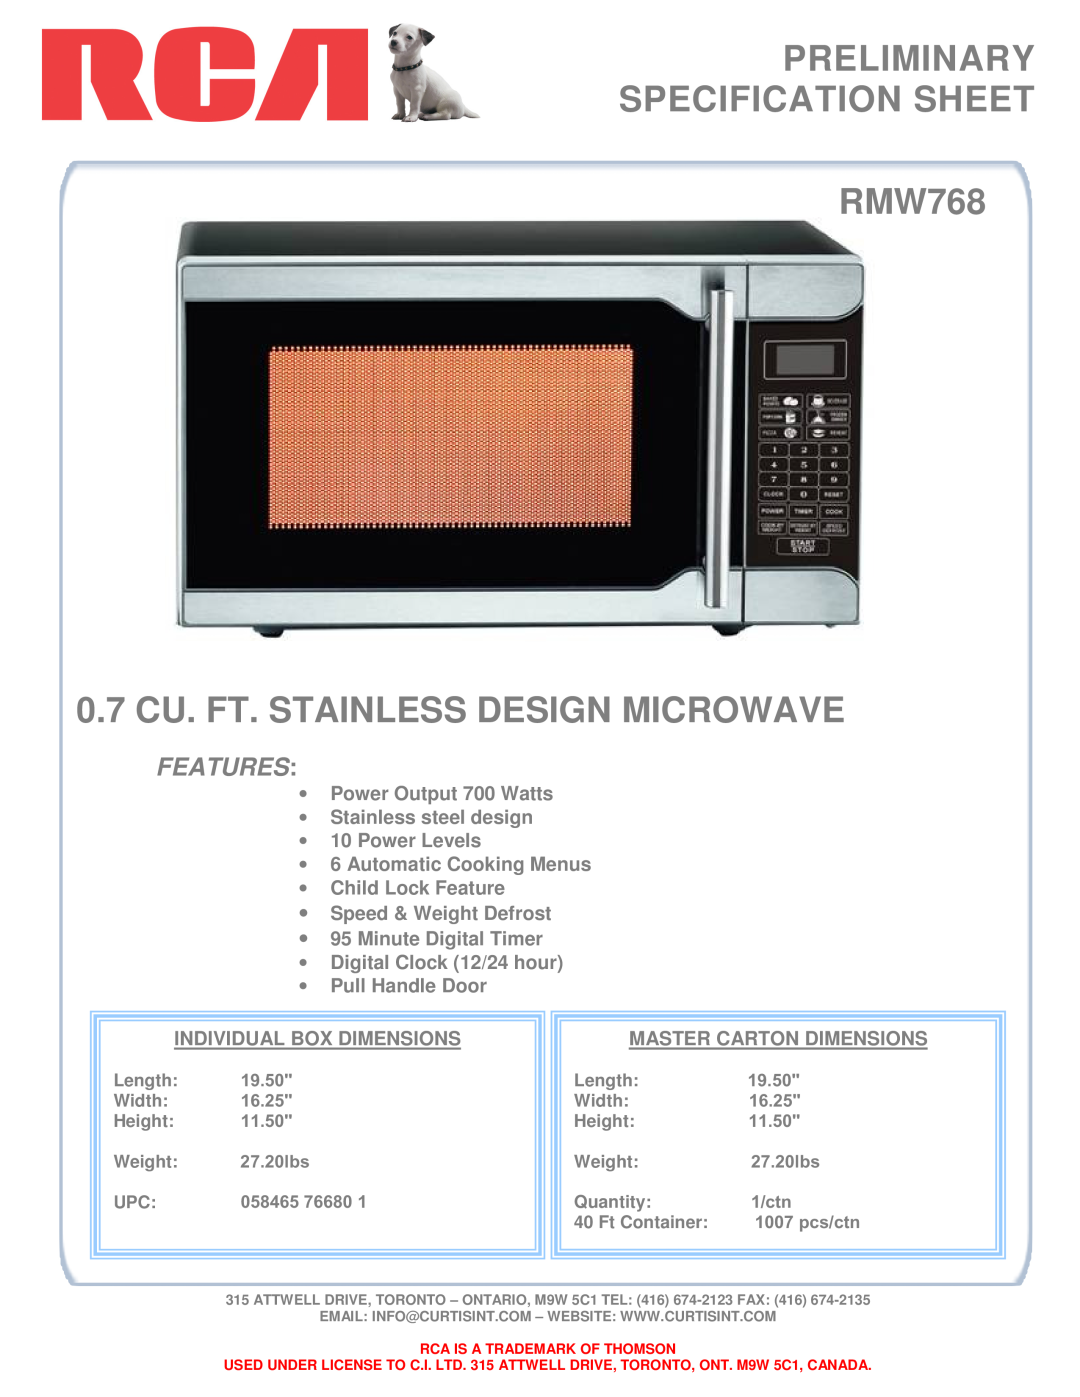 Curtis manual PRELIMINARY SPECIFICATION SHEET RMW768, 0.7 CU. FT. STAINLESS DESIGN MICROWAVE, Features 